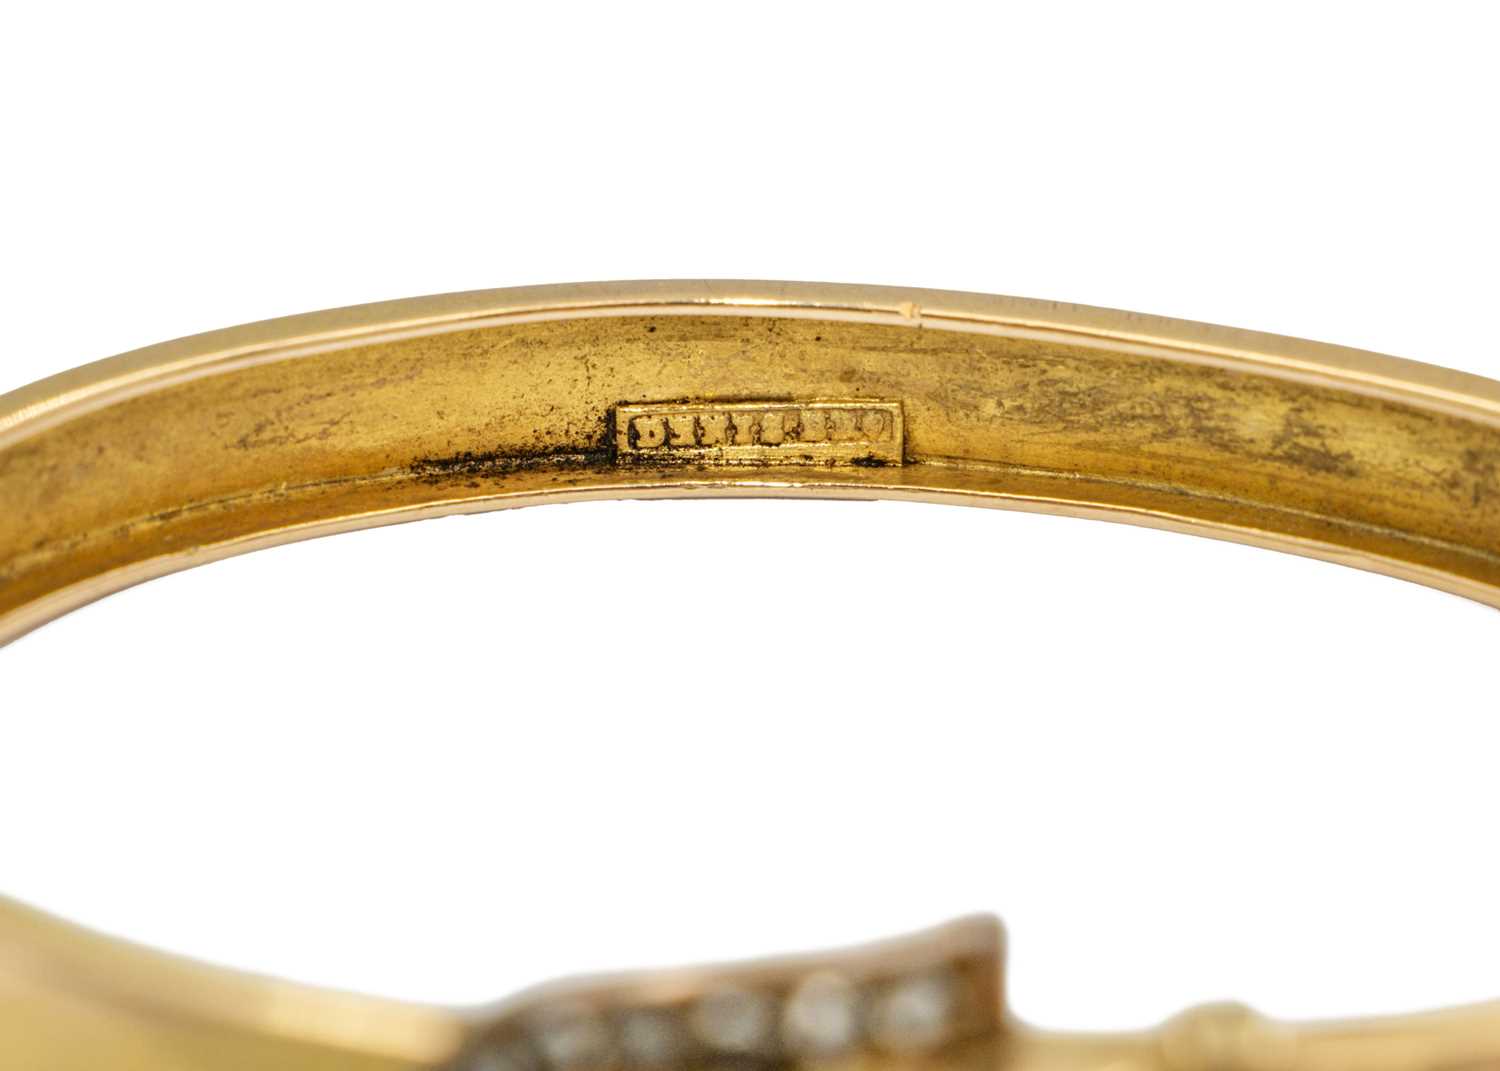 A Victorian gold hinged bangle diamond set with a buckle design clasp, signed DENIS BRO. - Image 3 of 4